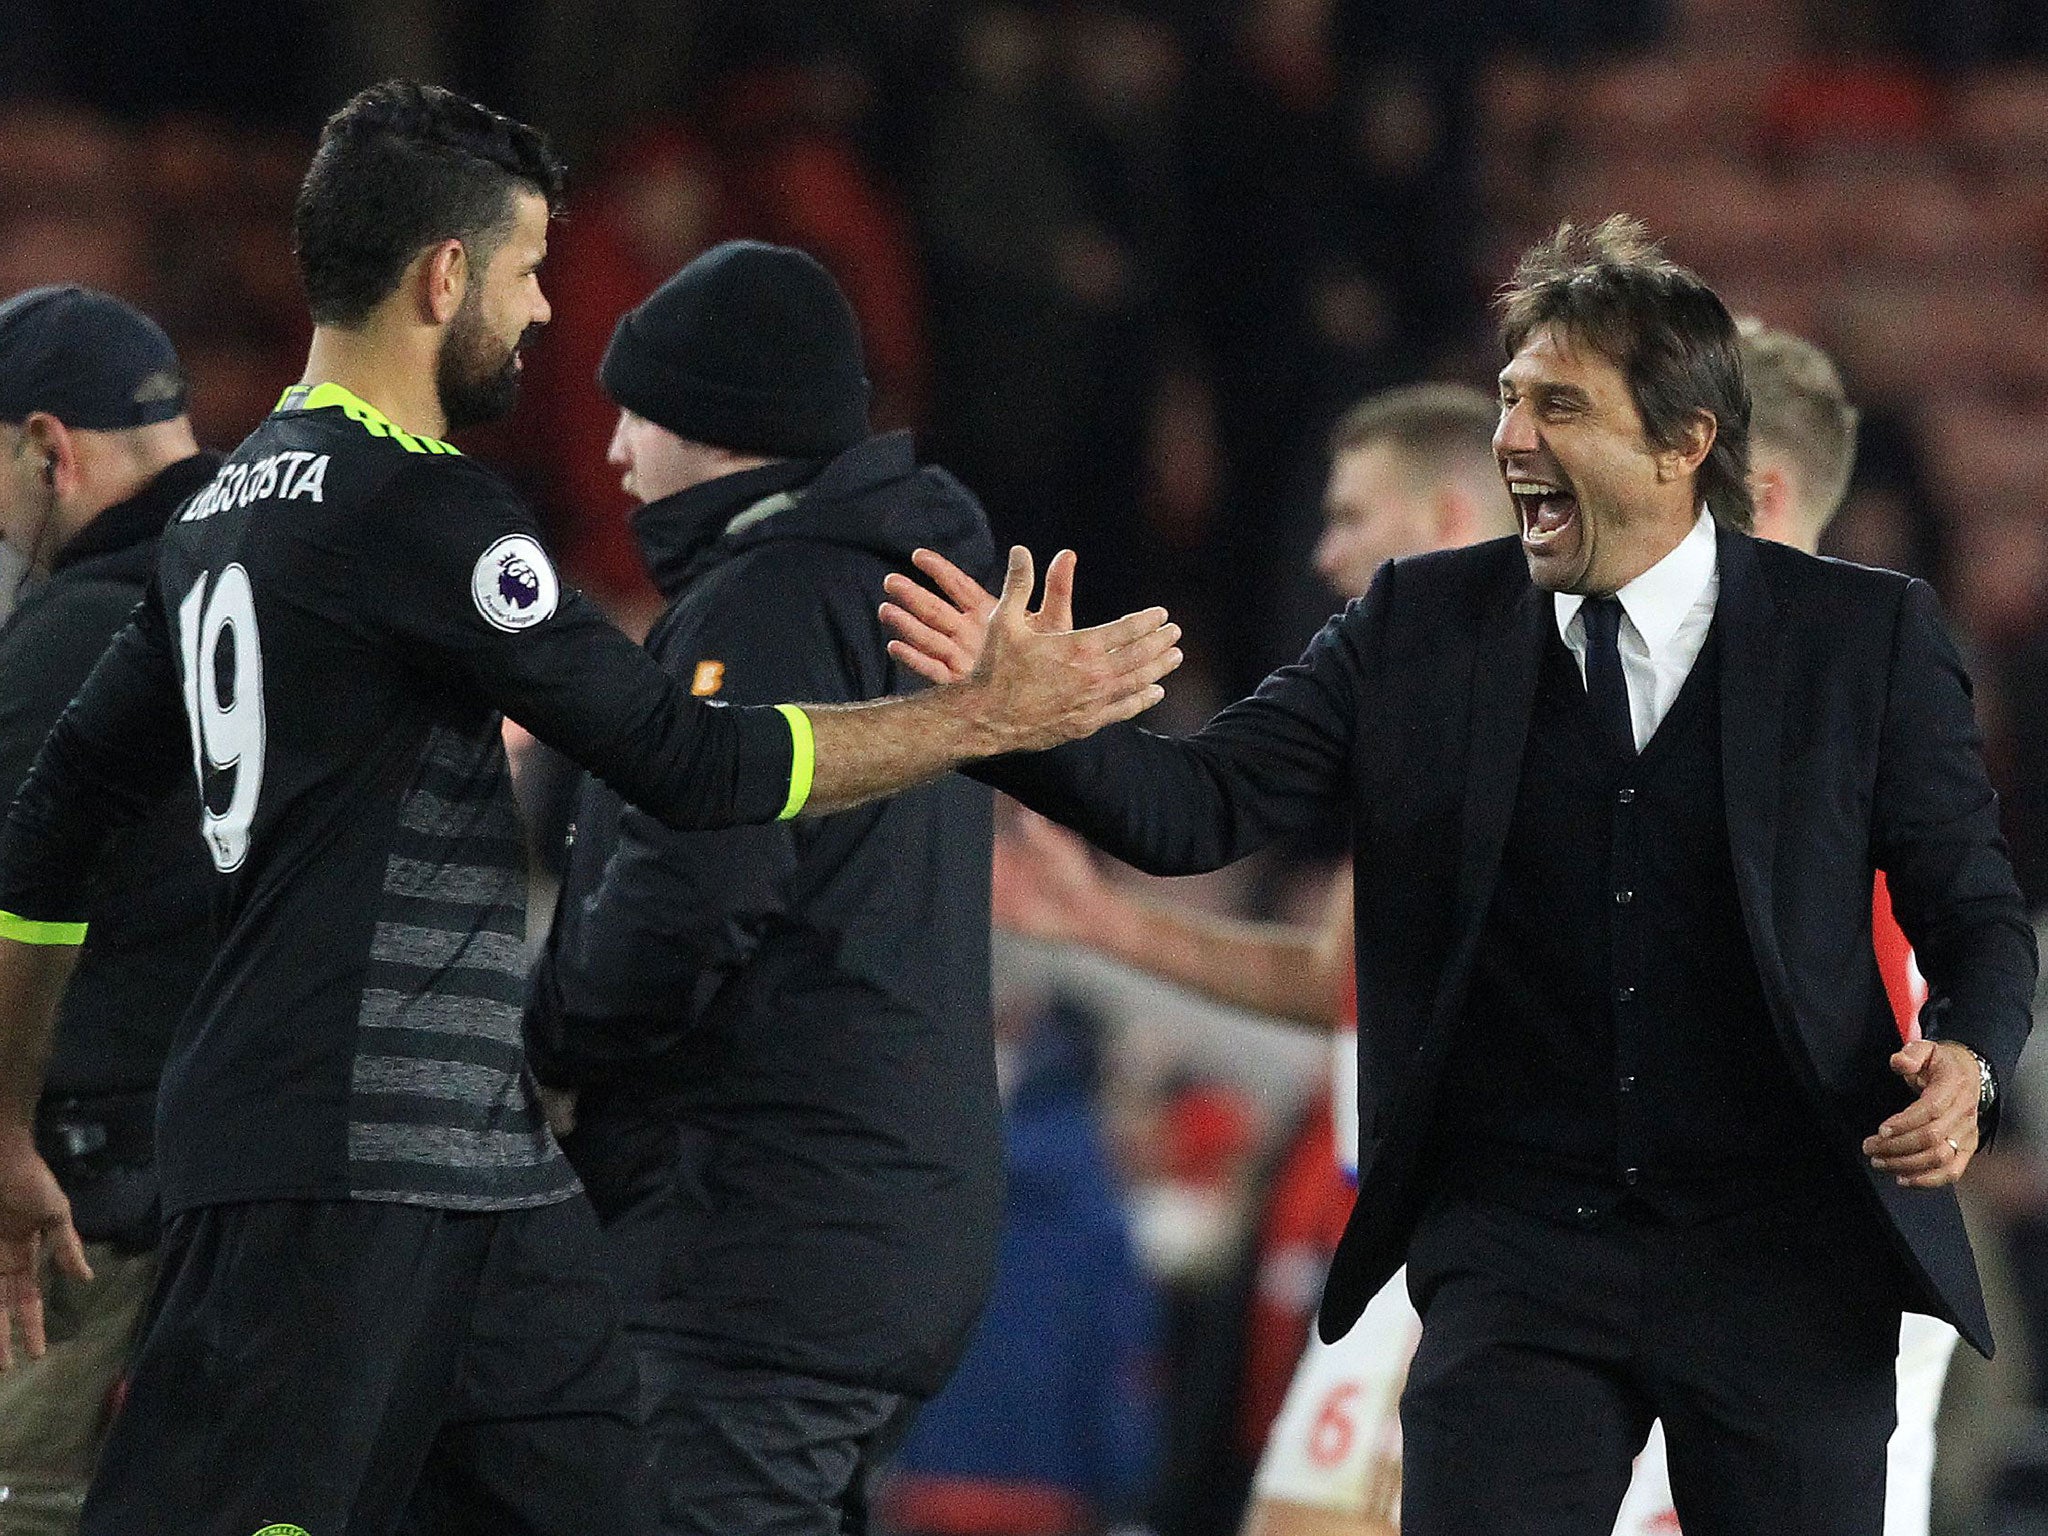 Antonio Conte celebrates with Diego Costa after the striker pounced to score his tenth goal this season